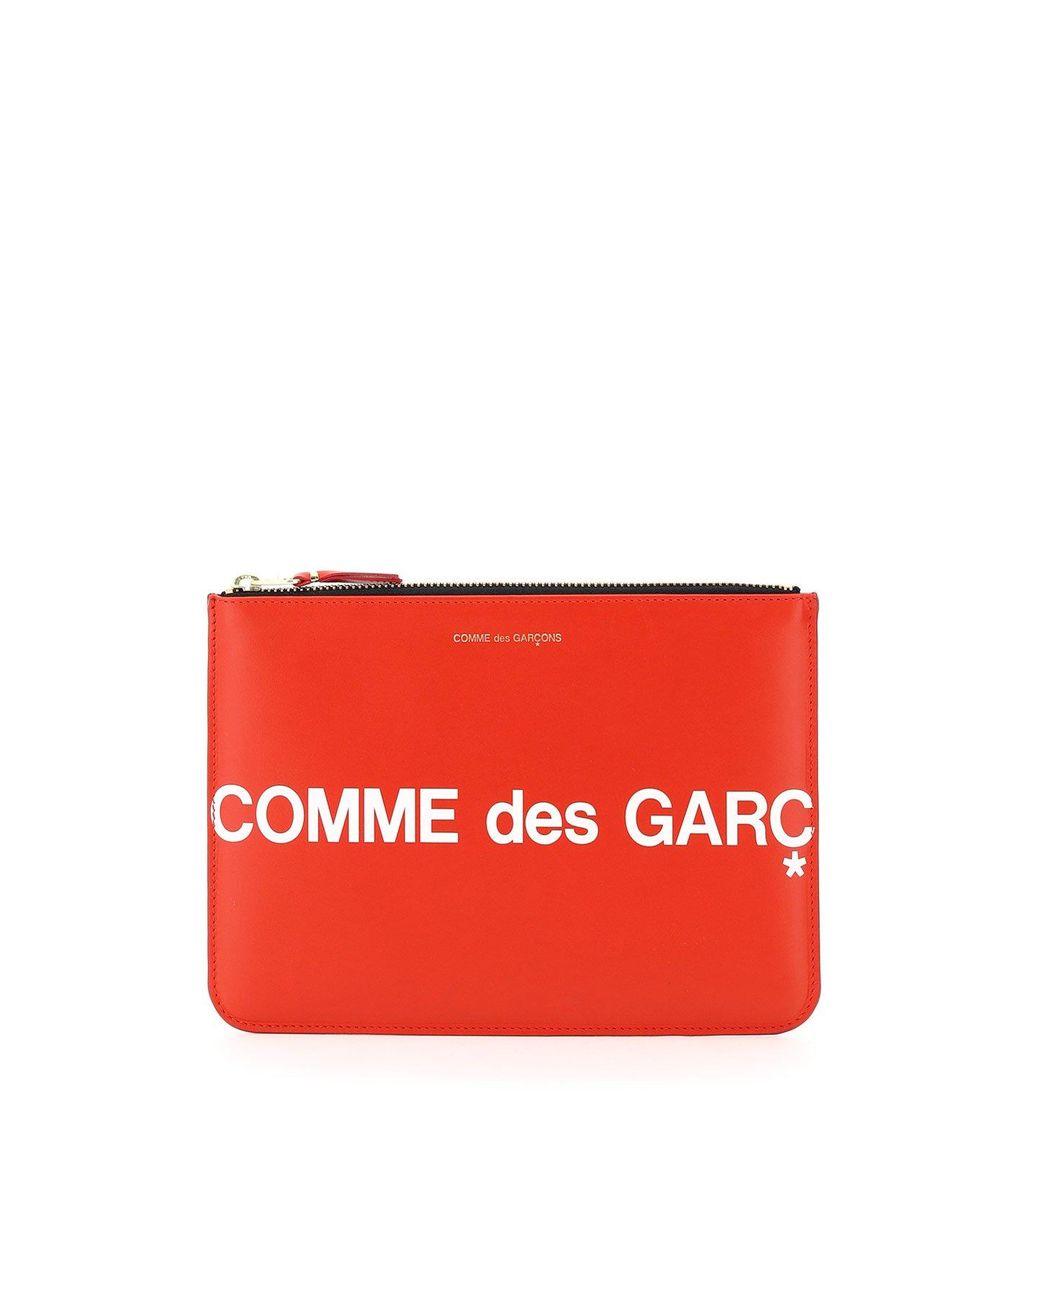 Comme des Garçons Leather Pouch With Logo in Red for Men - Lyst